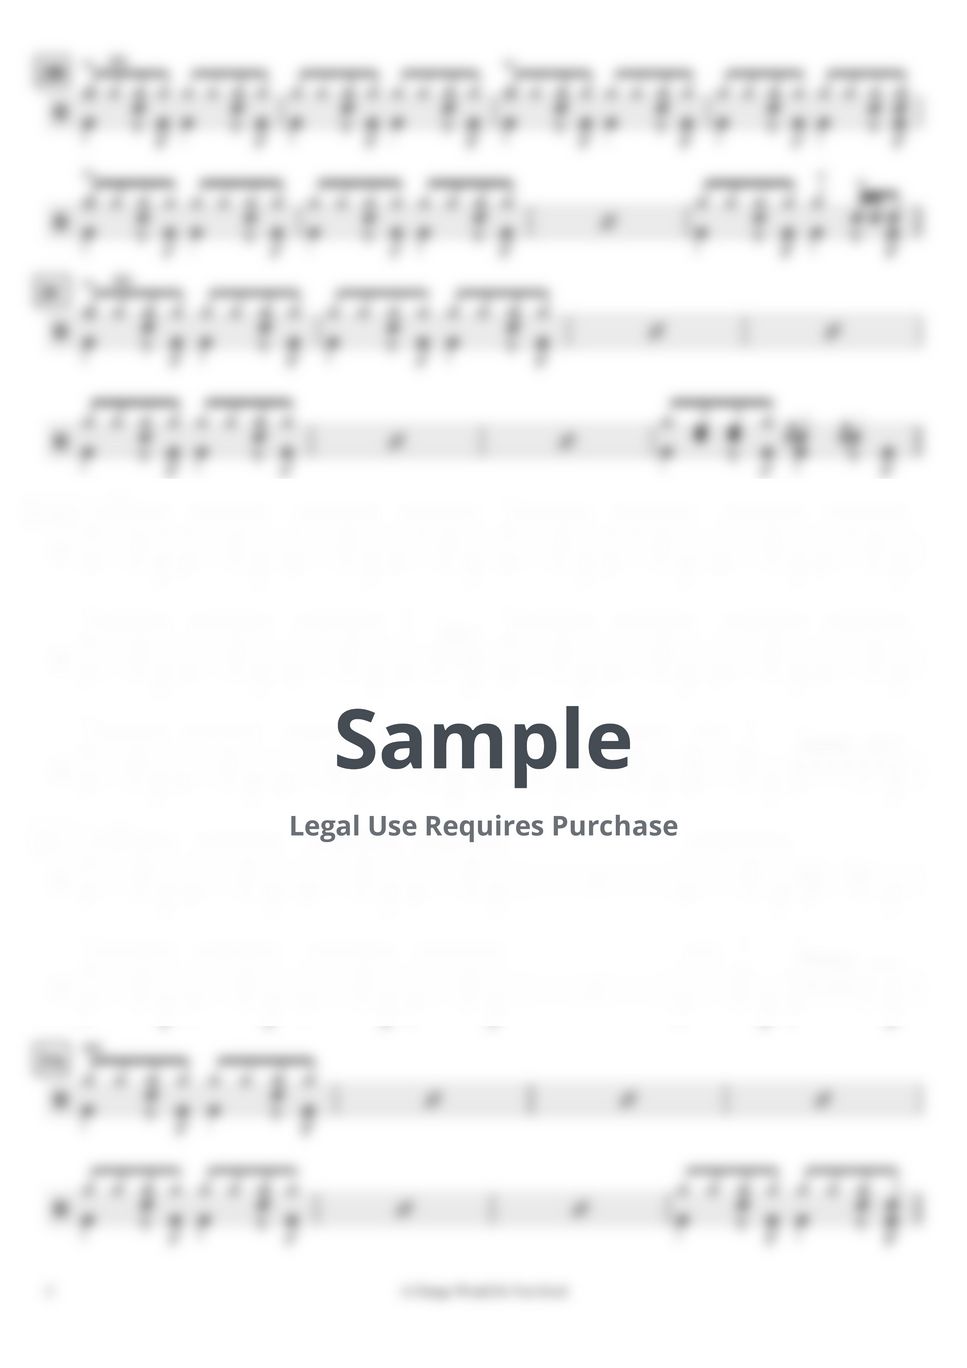 Sheryl Crow - A Change Would Do You Good by Cookai's J-pop Drum sheet music!!!